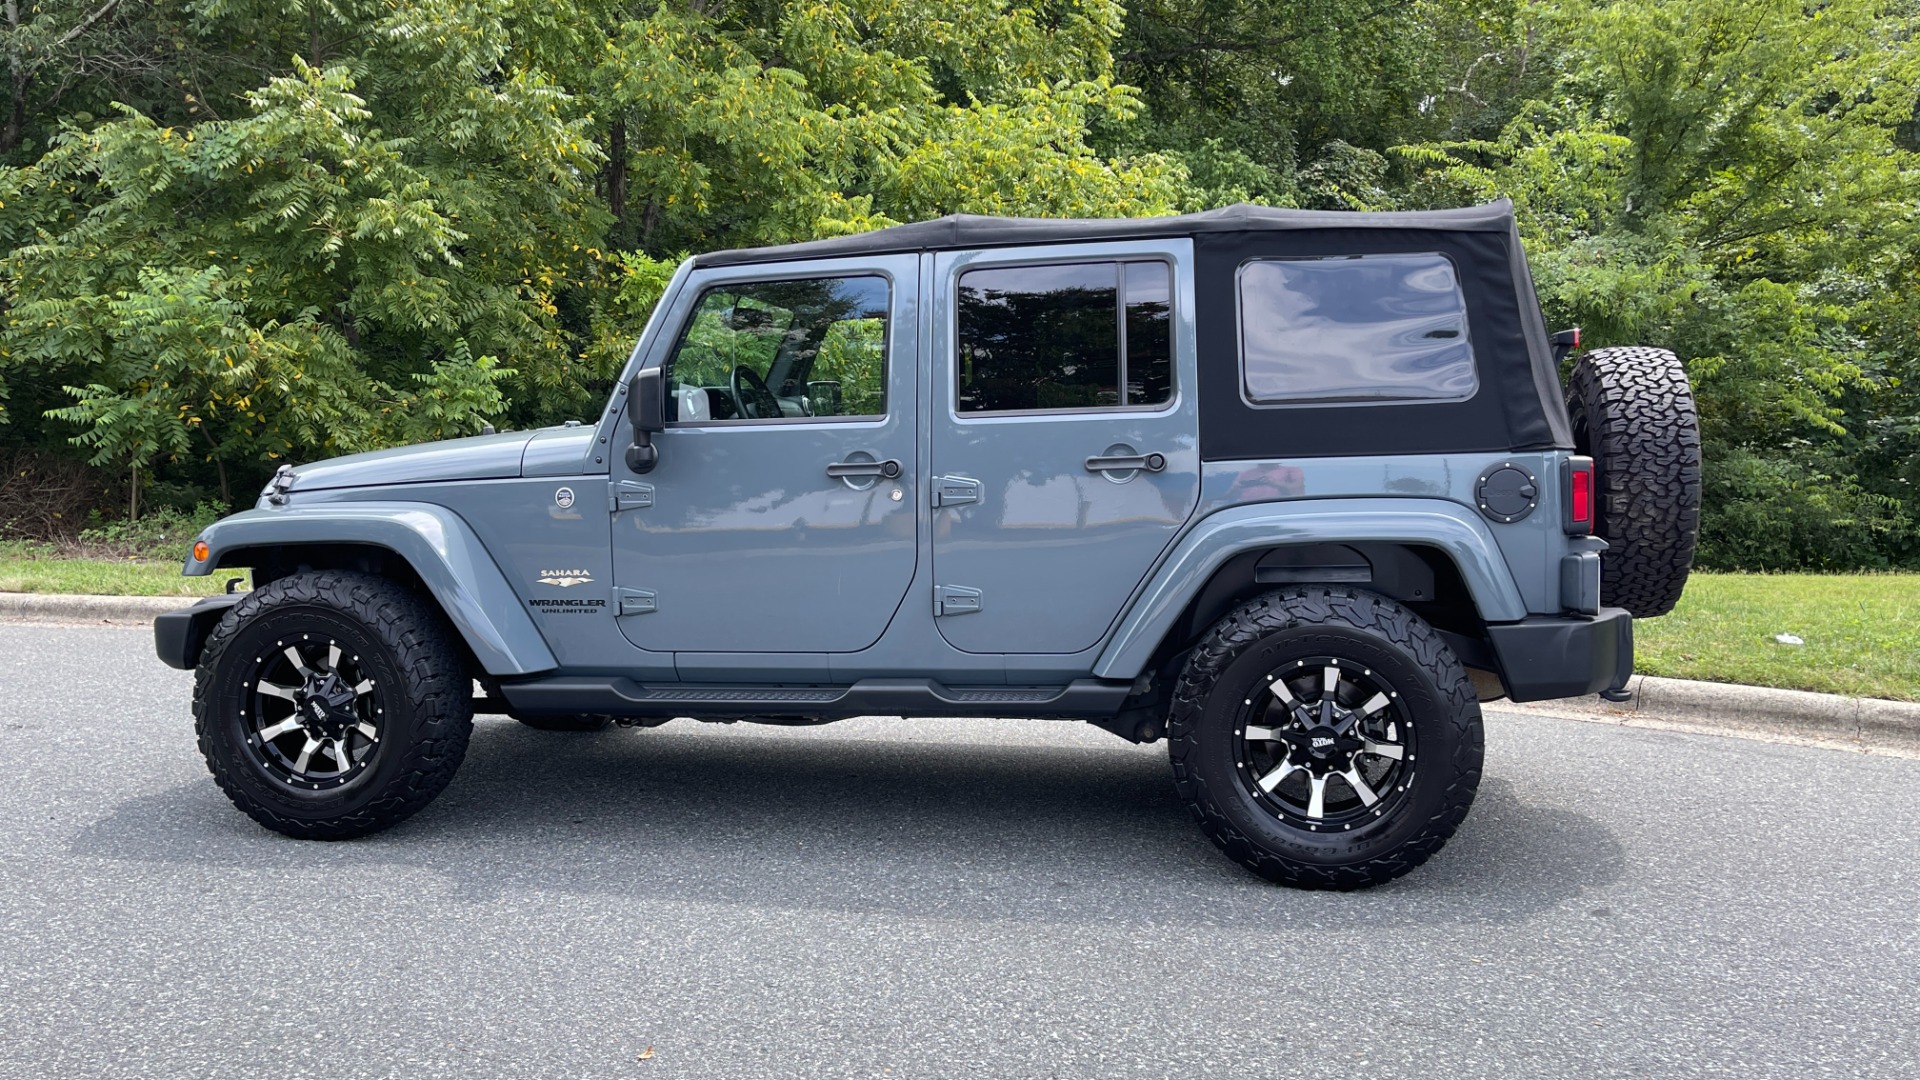 Used 2015 Jeep Wrangler Unlimited SAHARA / UPGRADED WHEELS / SOFT TOP / LED HEADLIGHTS / MAX TOW PACKAGE for sale Sold at Formula Imports in Charlotte NC 28227 6